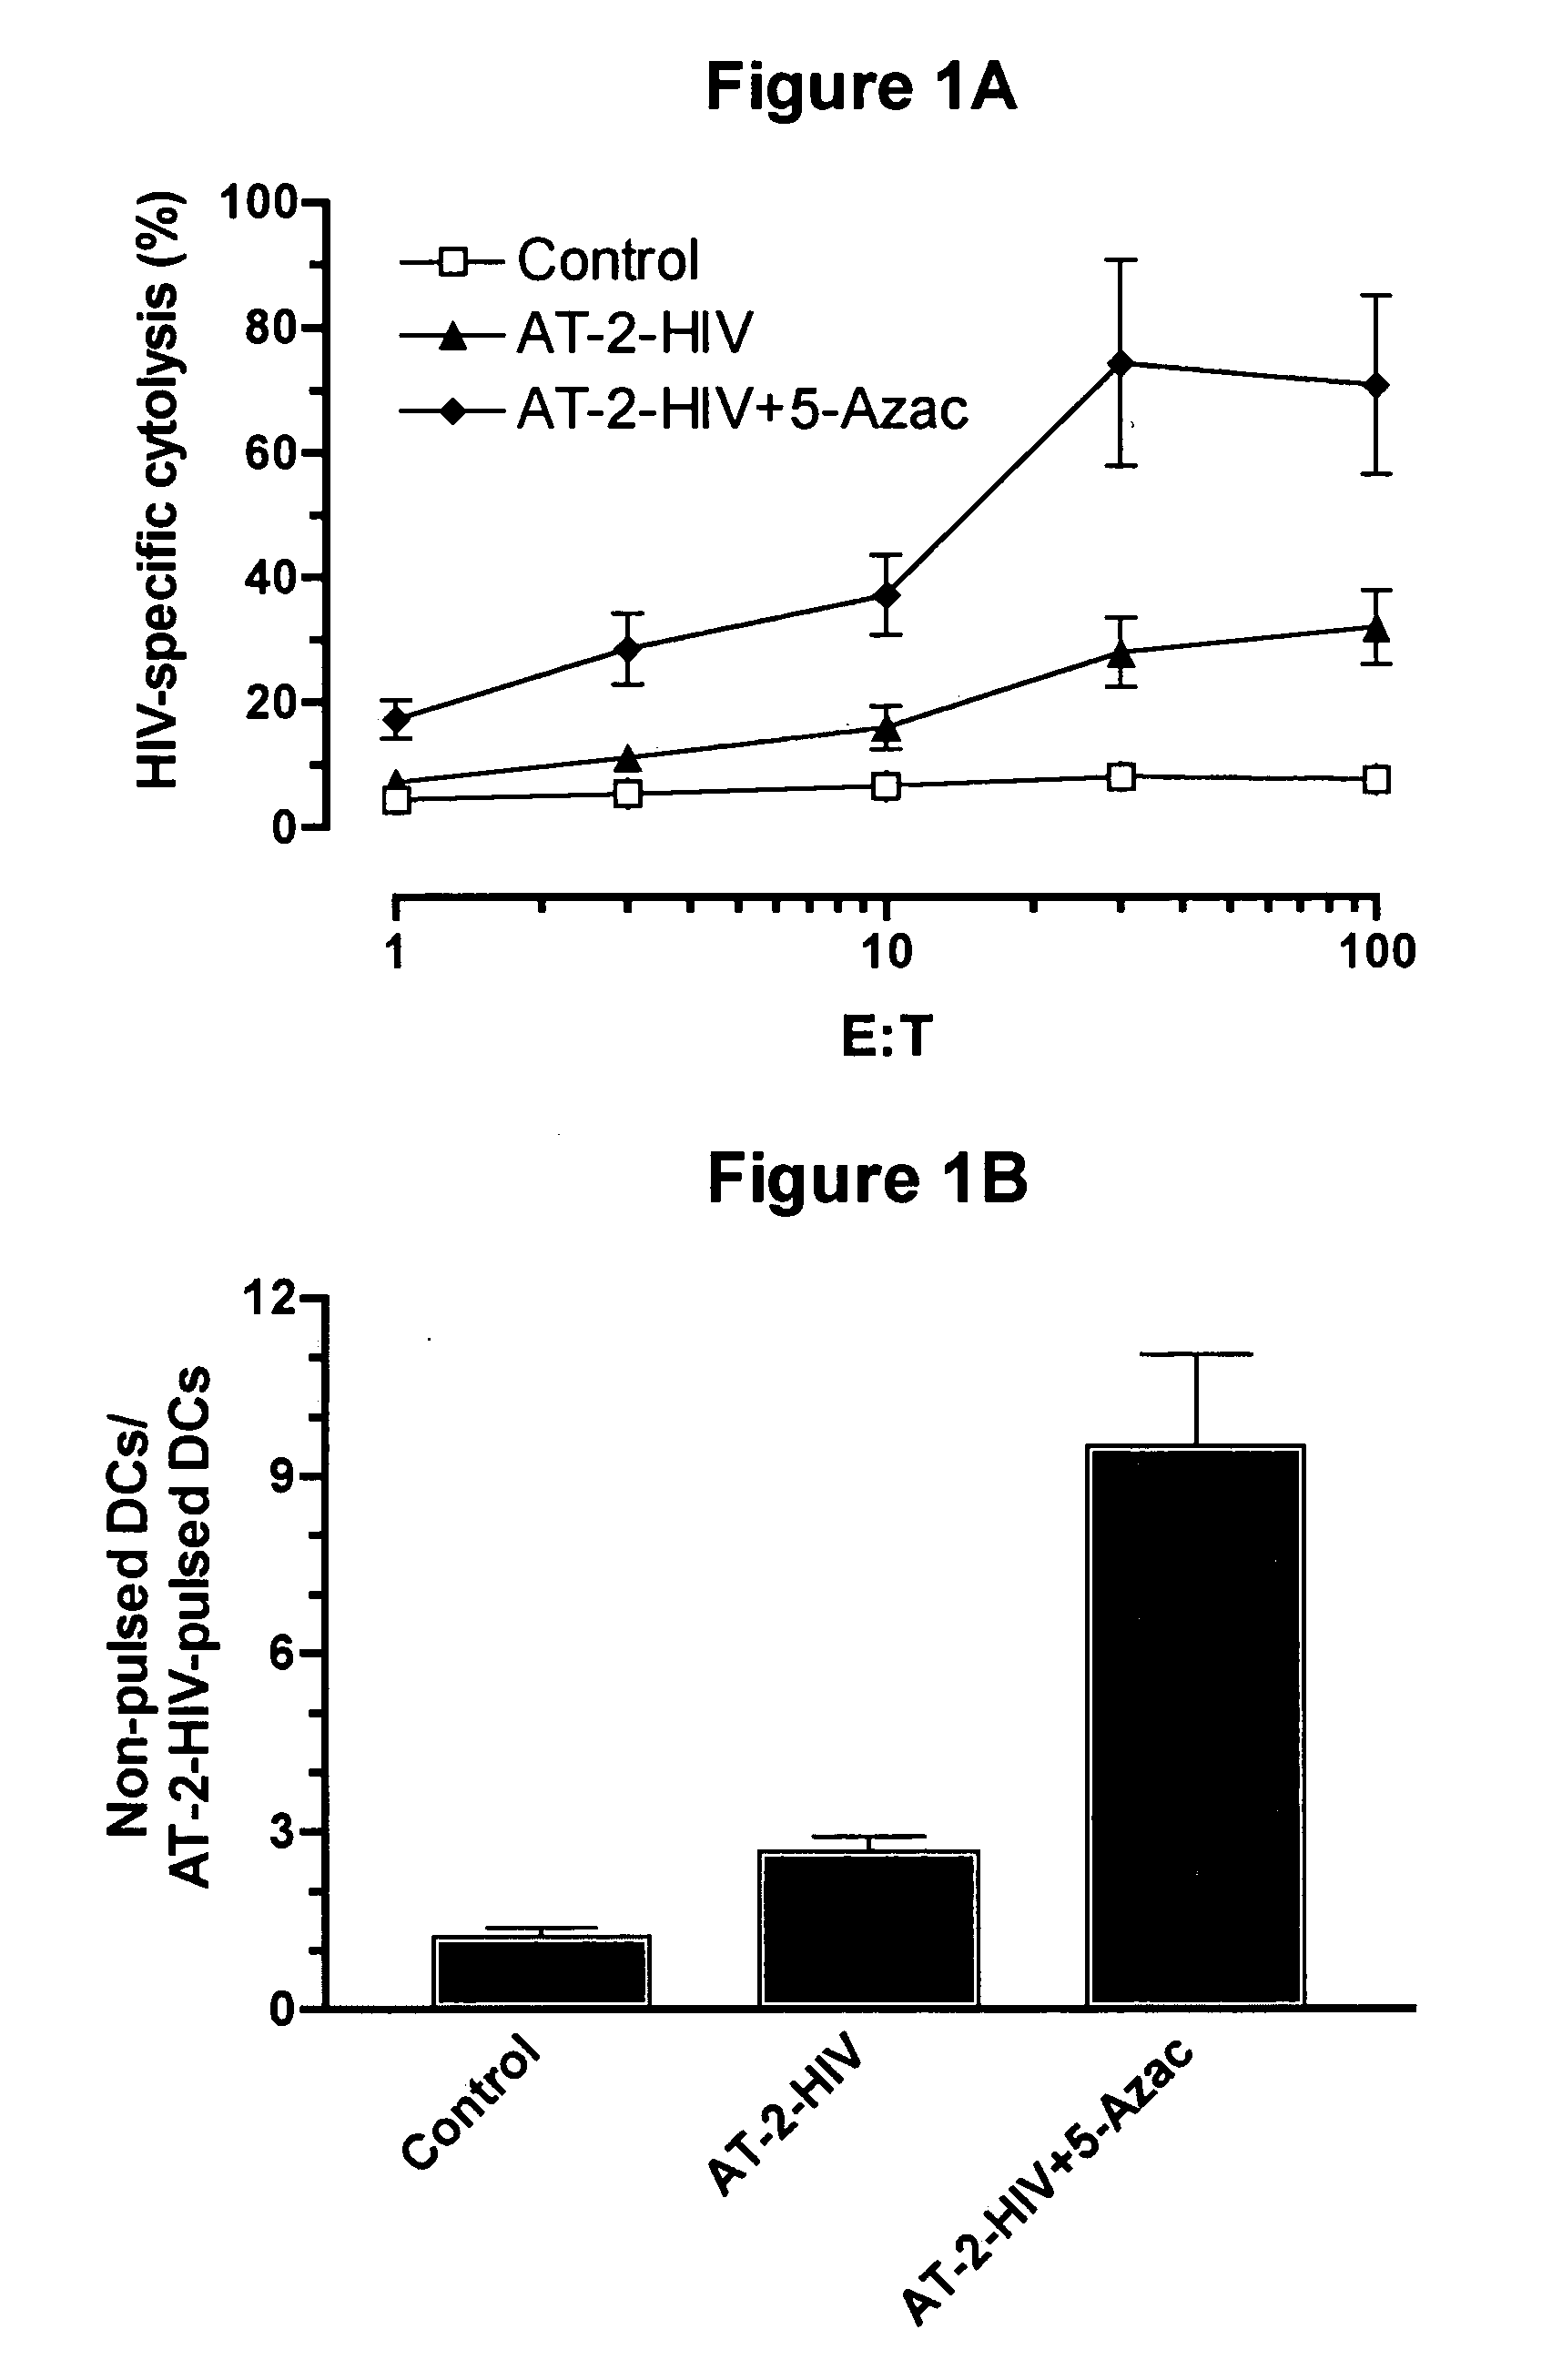 Compositions comprising demethylating agents as enhancers of immunotherapy for the treatment of chronic infections and neoplastic diseases and methods for treating the same